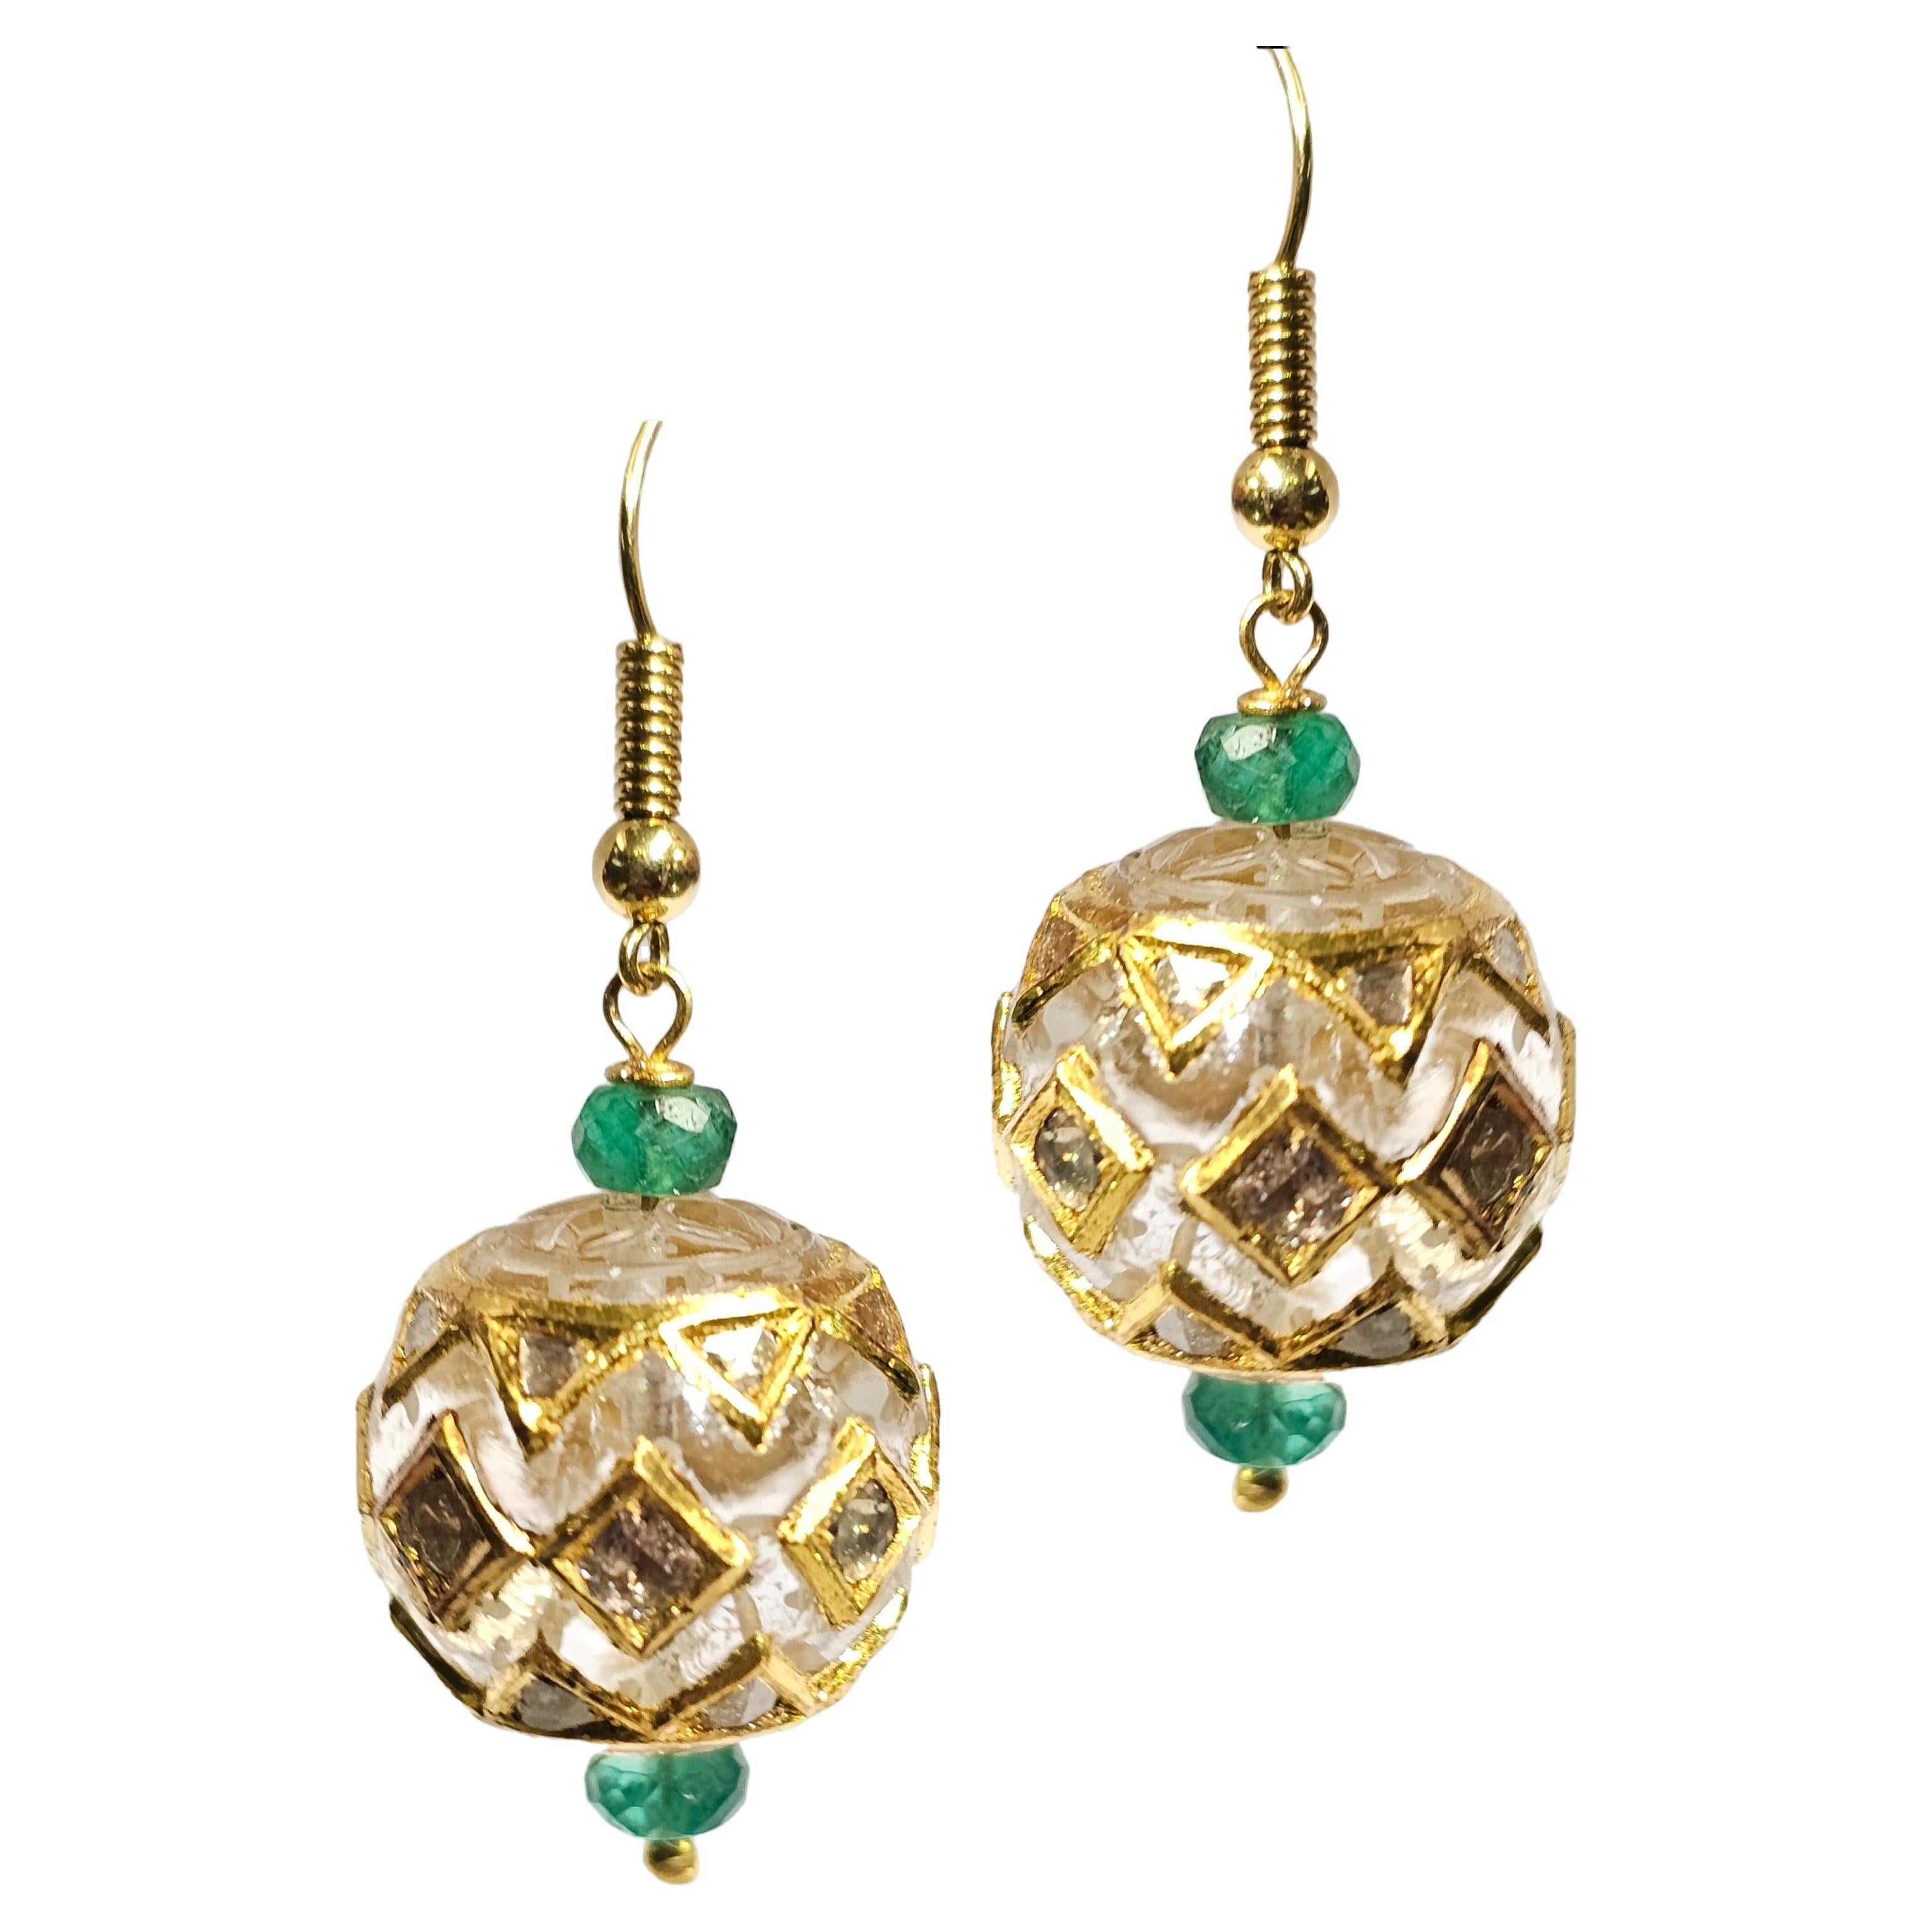  Rock Crystal & Emerald Bead Earrings

A pair of earrings made of 14 karat yellow gold, carved rock crystal beads, and carved emerald beads

Length: 1.5